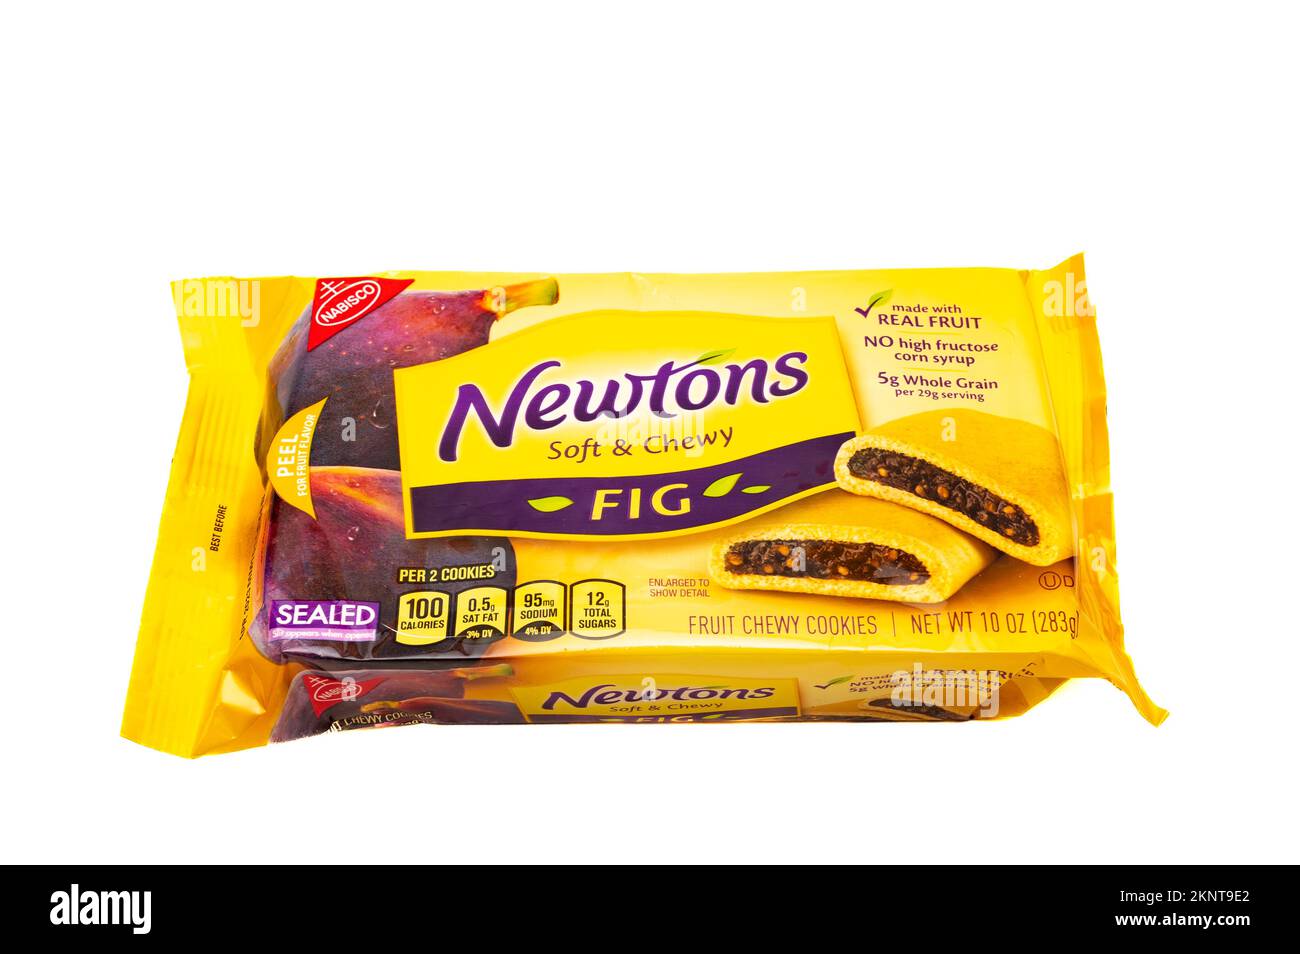 A package of Nabisco brand Fig Newtons, soft & chewy, made with real fruit, isolated on white Stock Photo